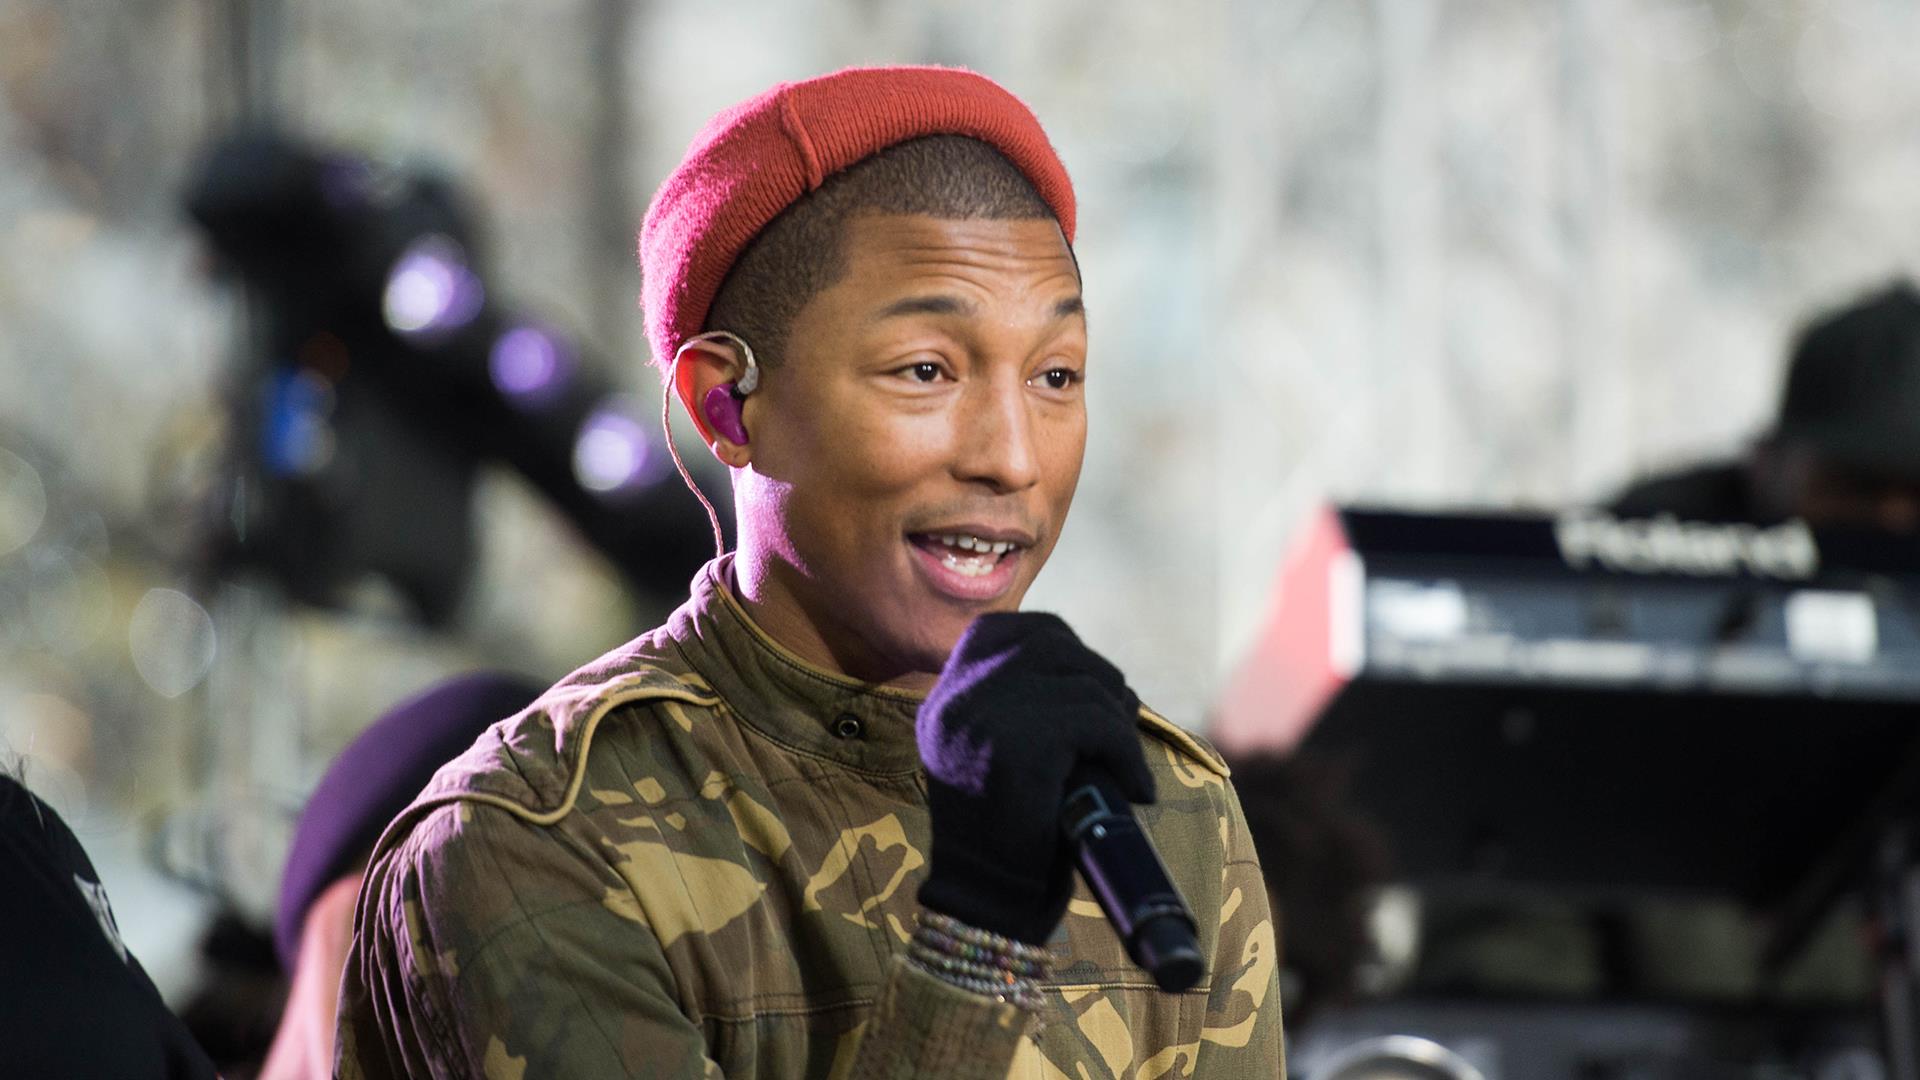 Watch Pharrell Williams perform his new song 'Runnin'' live on TODAY